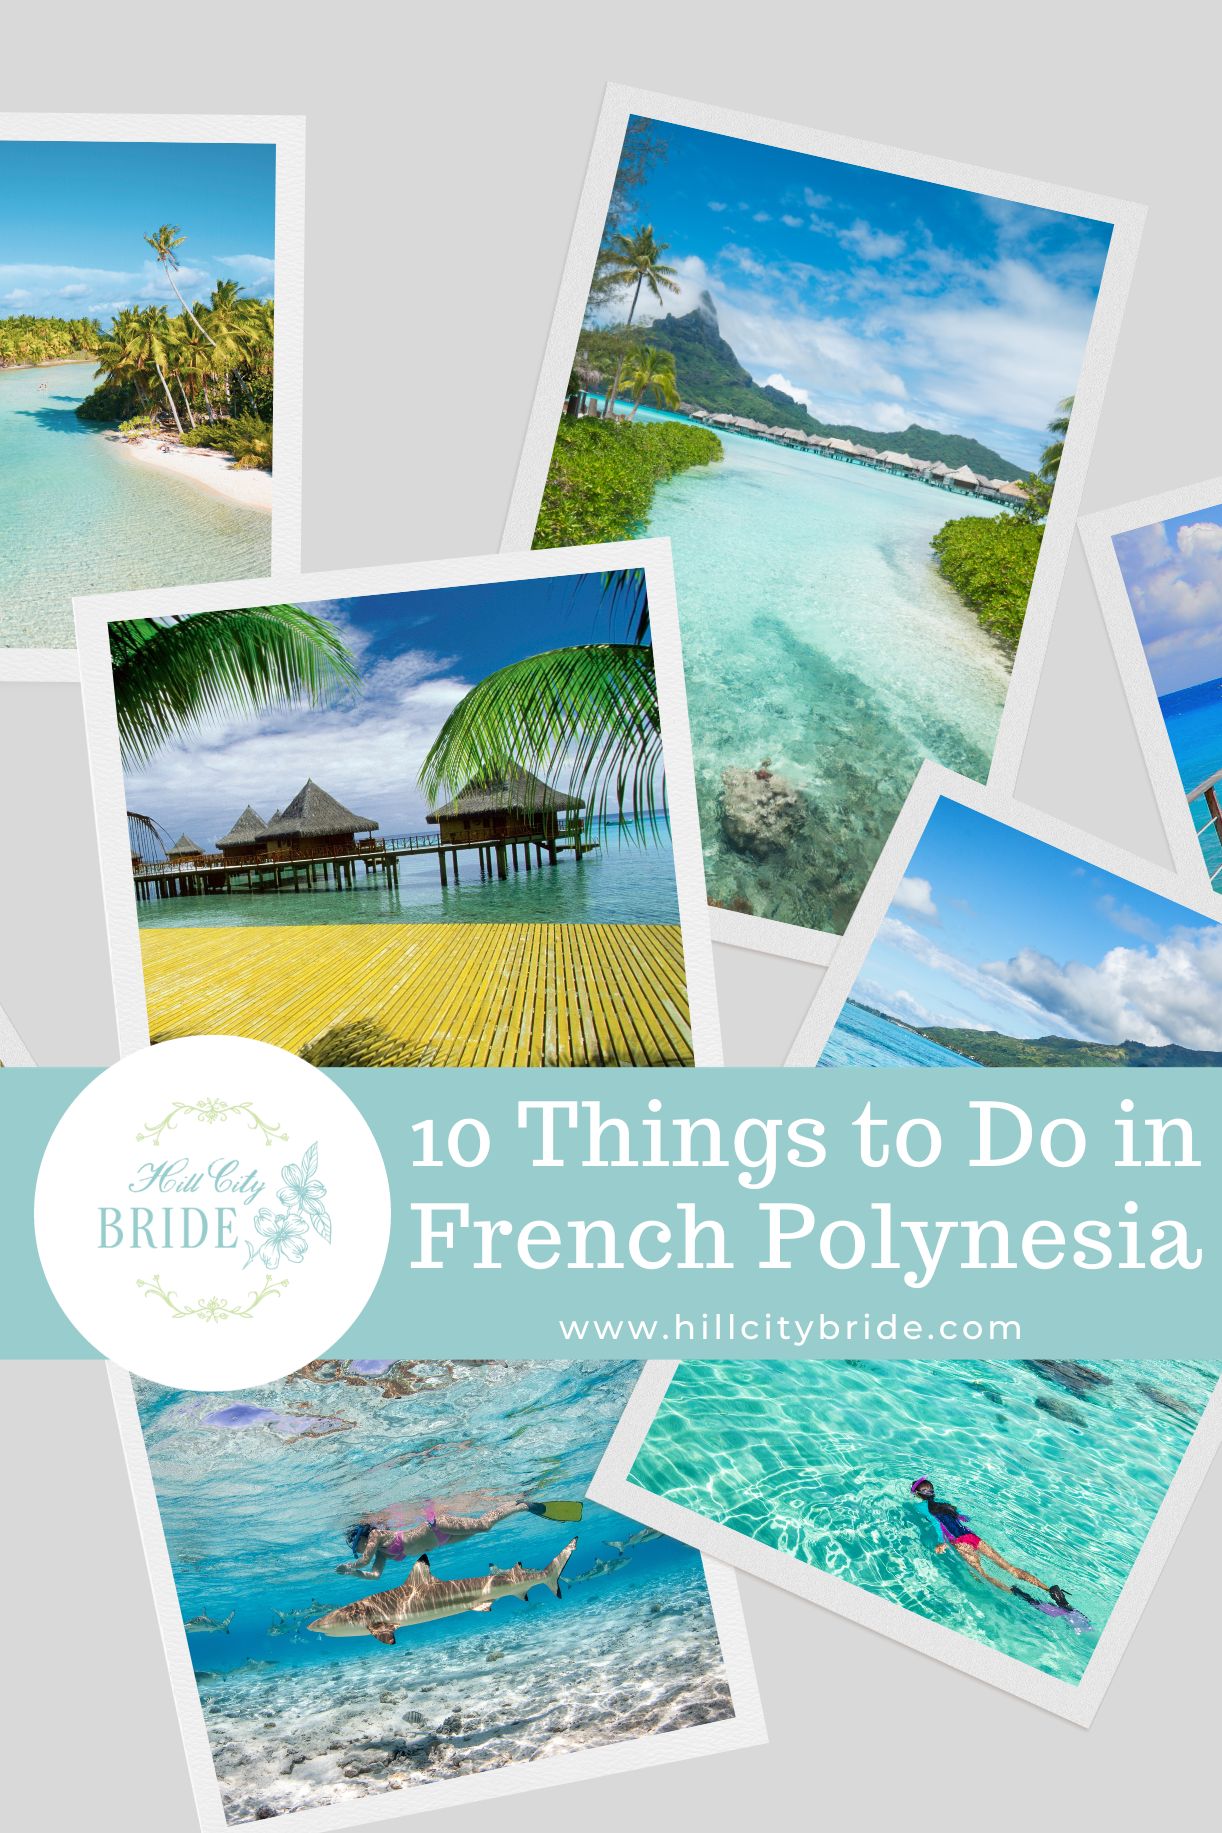 10 Things to Do in French Polynesia for Couples